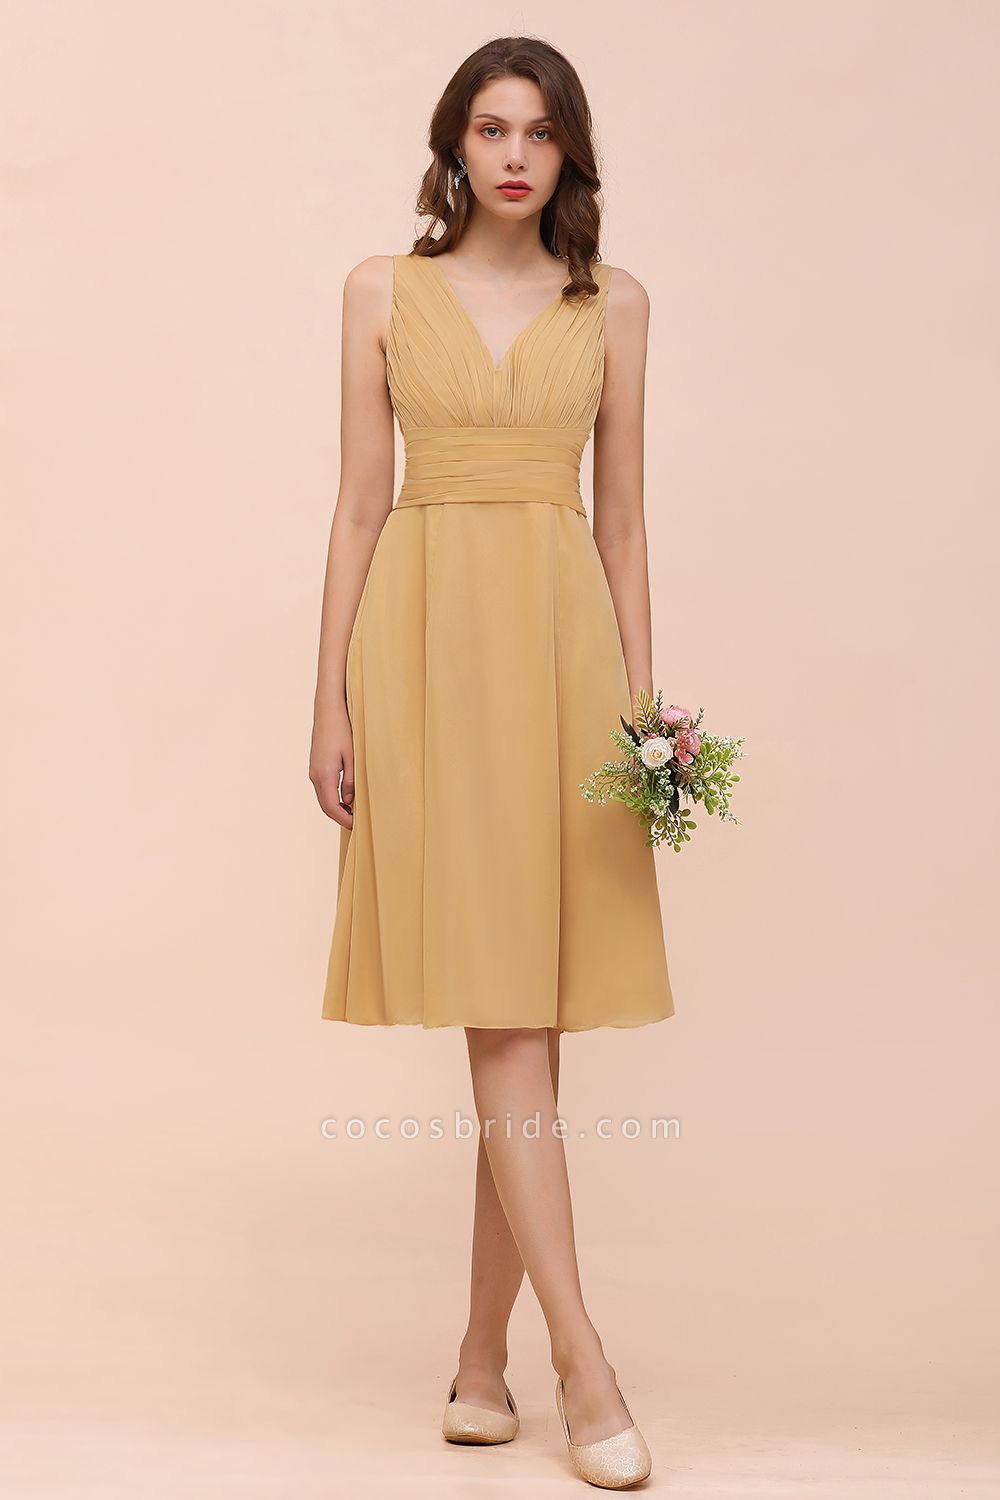 Affordable Short A-line V-neck Gold Chiffon Bridesmaid Dress with Bow